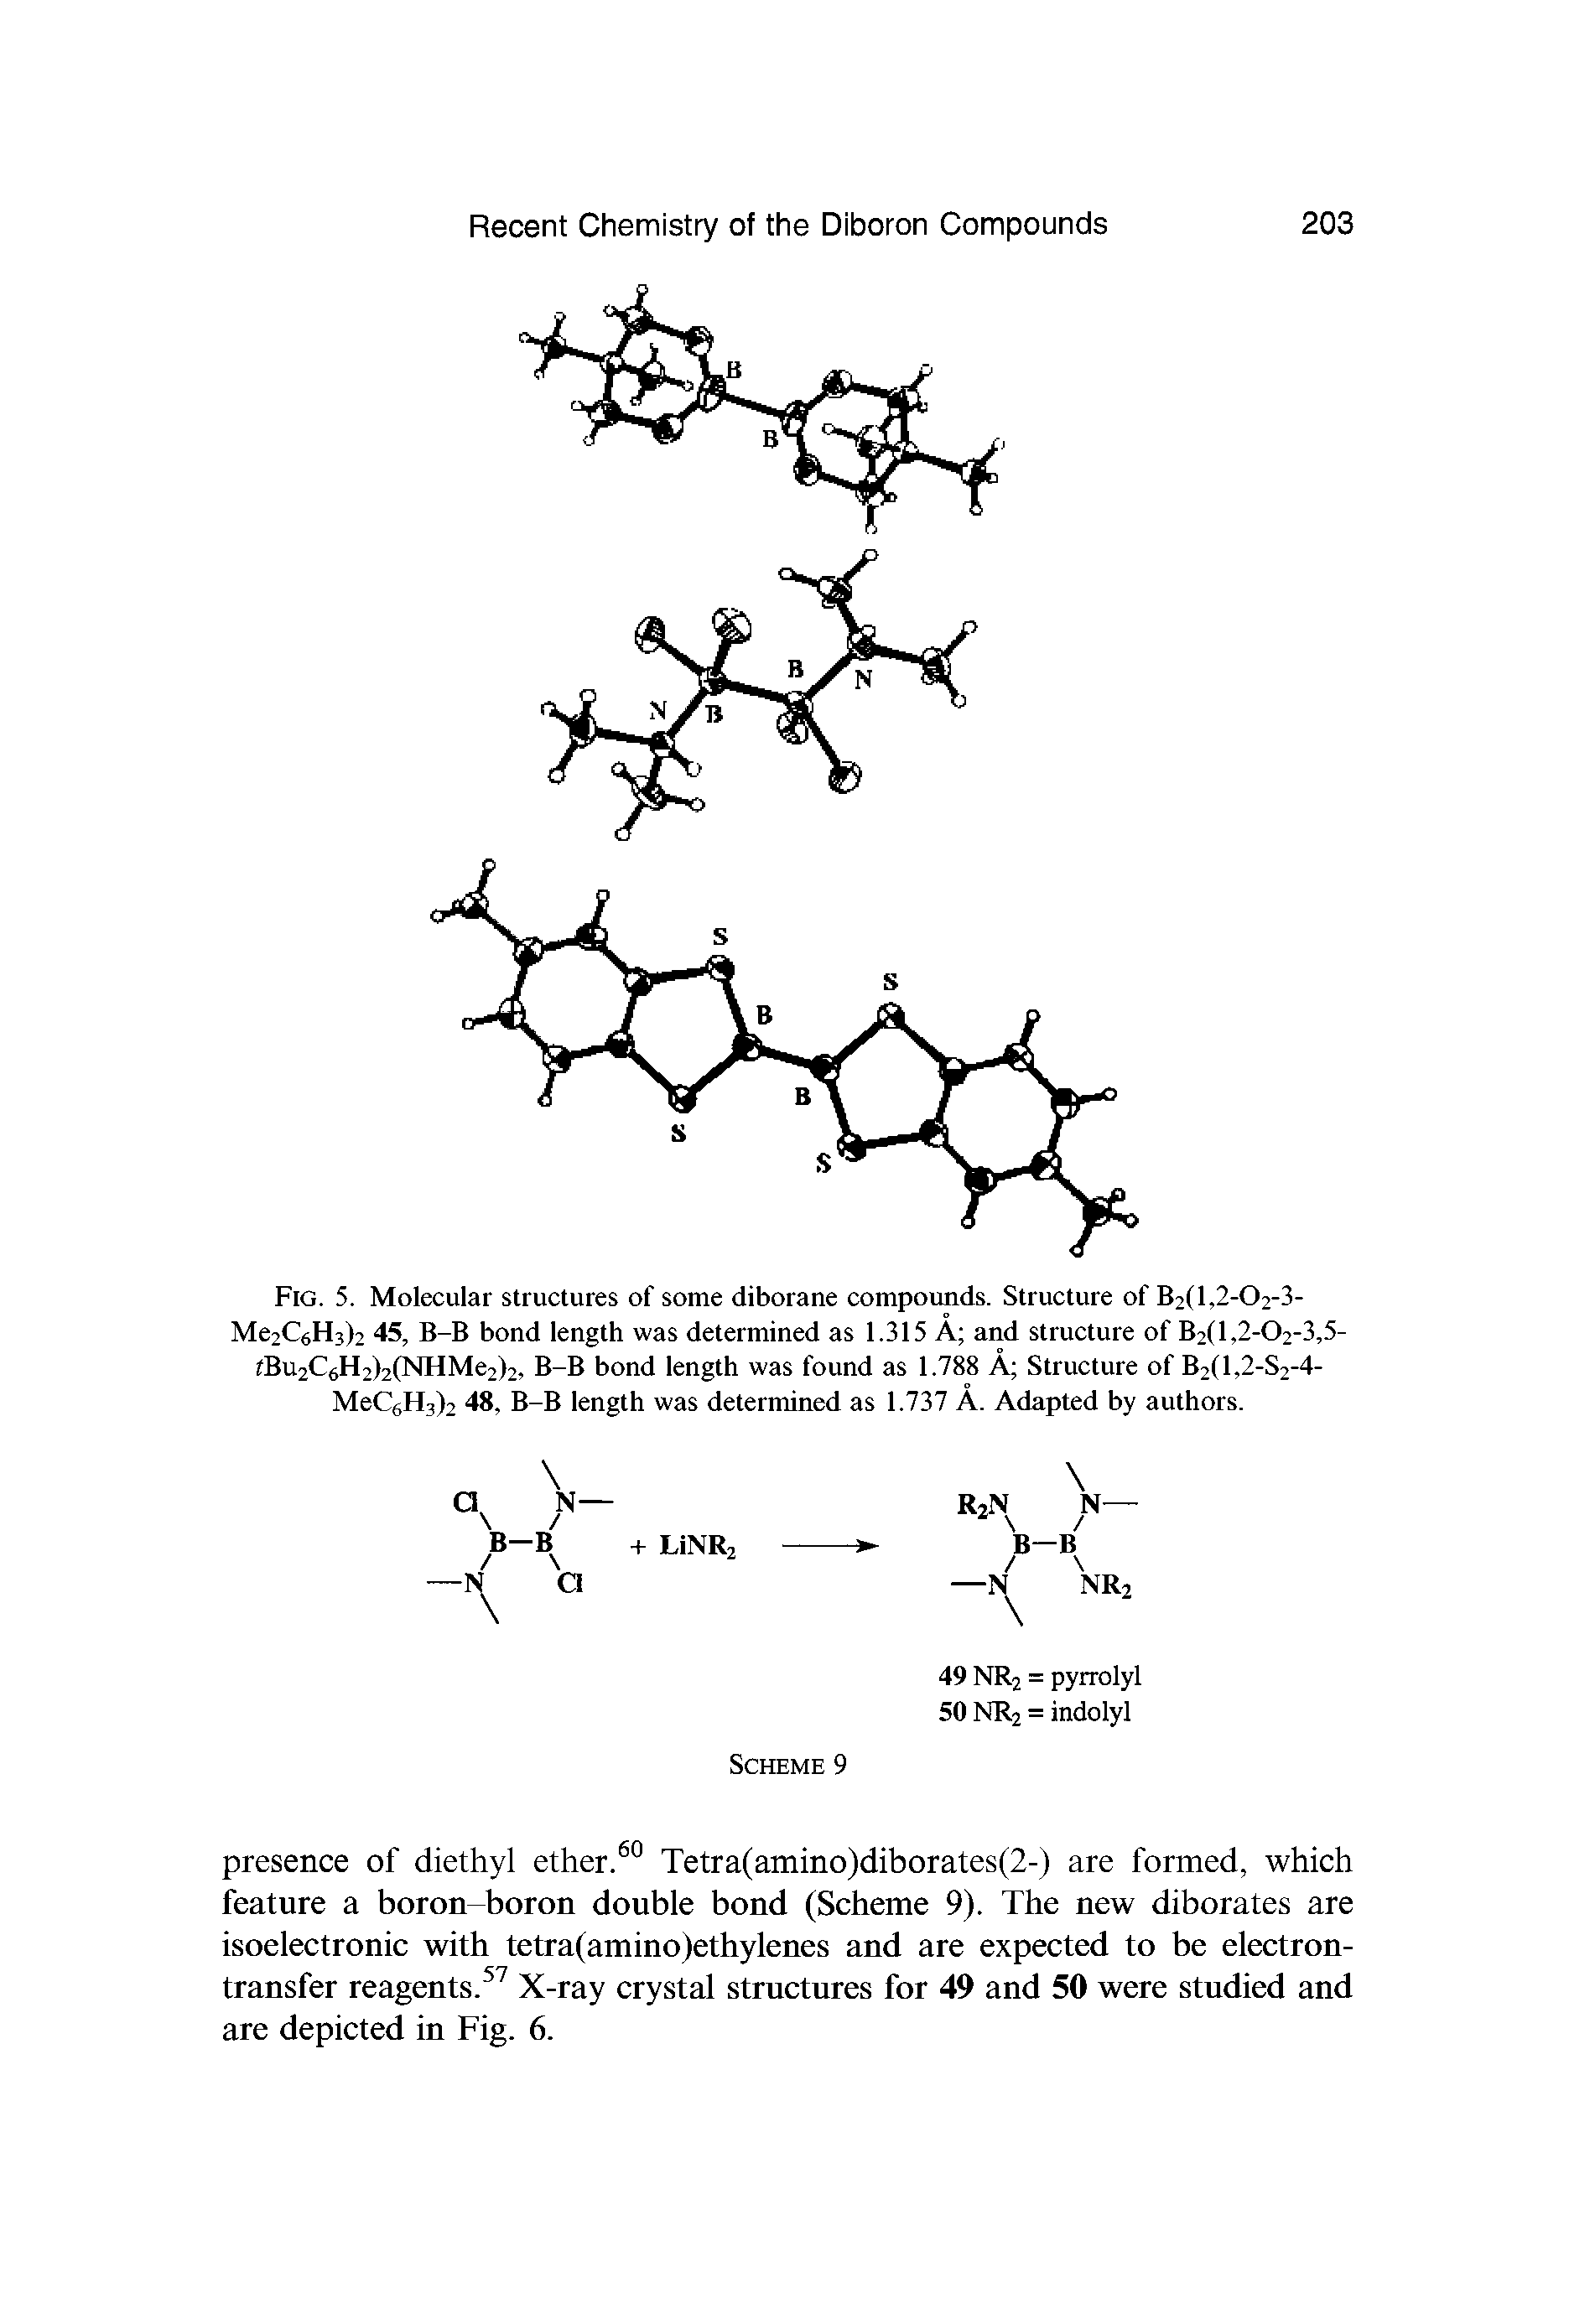 Fig. 5. Molecular structures of some diborane compounds. Structure of B2(l,2-02-3-Me2C6H3)2 45, B-B bond length was determined as 1.315 A and structure of B2(l,2-02-3,5-tBu2C6H2)2(NHMe2)2, B-B bond length was found as 1.788 A Structure of B2(l,2-S2-4-MeC6H3)2 48, B-B length was determined as 1.737 A. Adapted by authors.